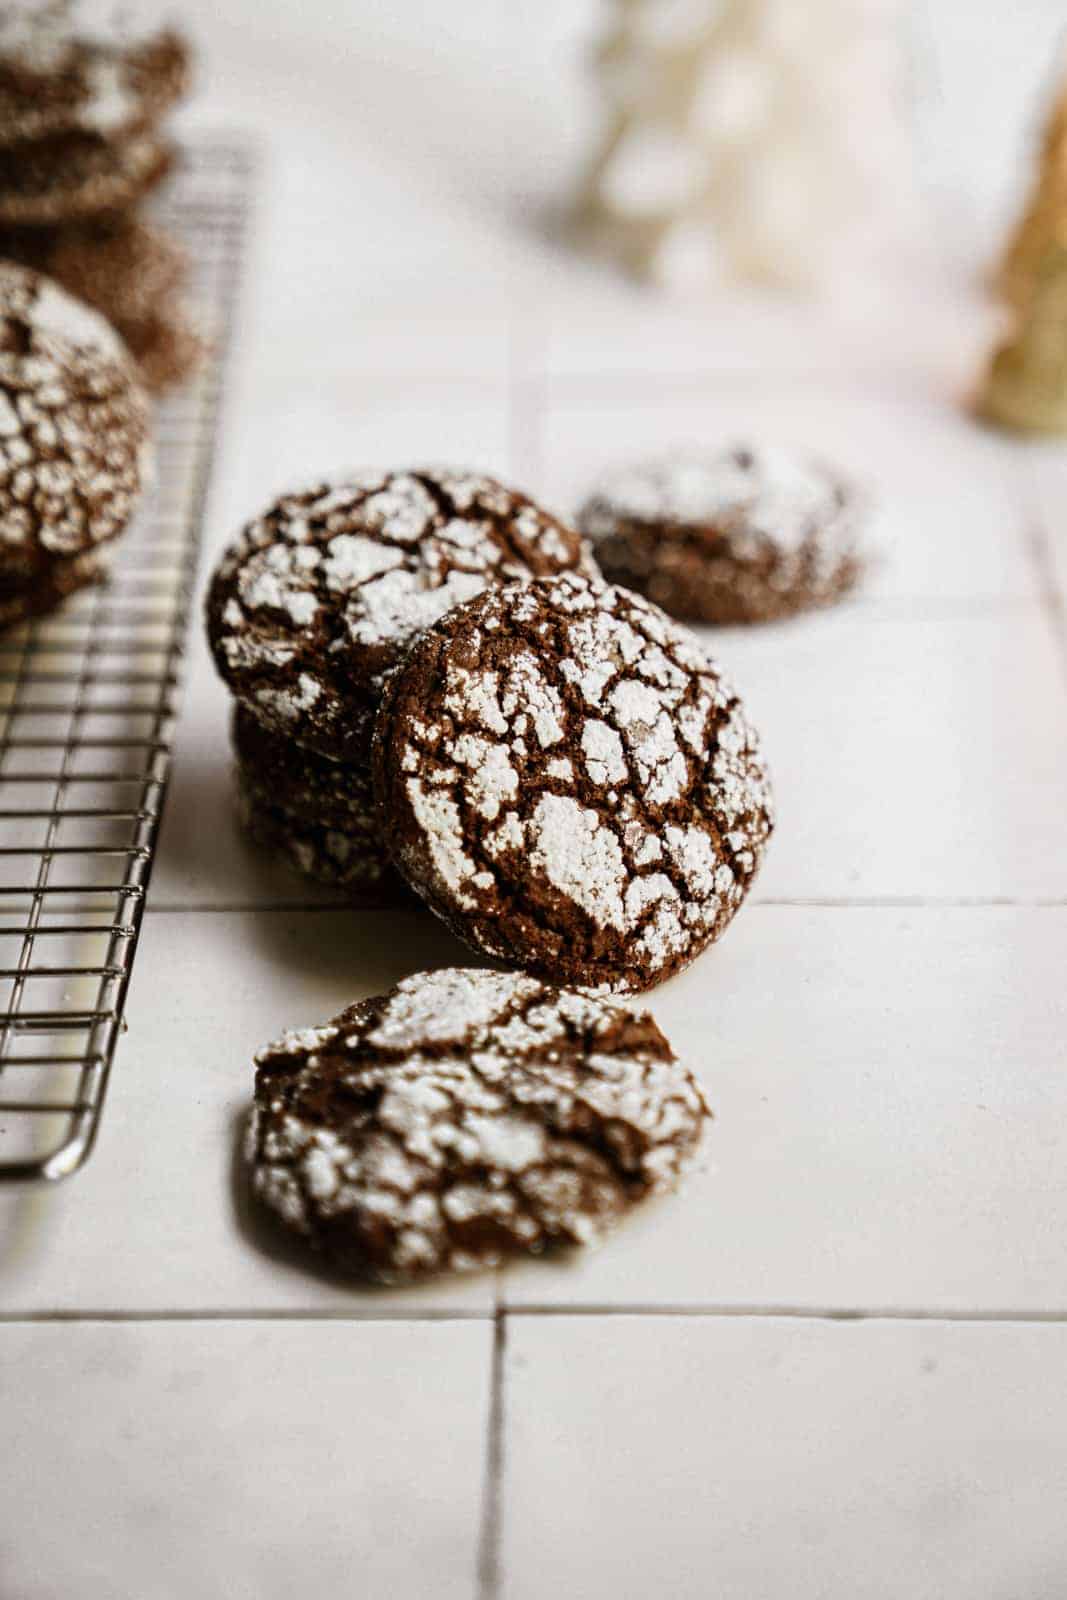 Chocolate crinkle cookies that are one of the best christmas cookie recipes